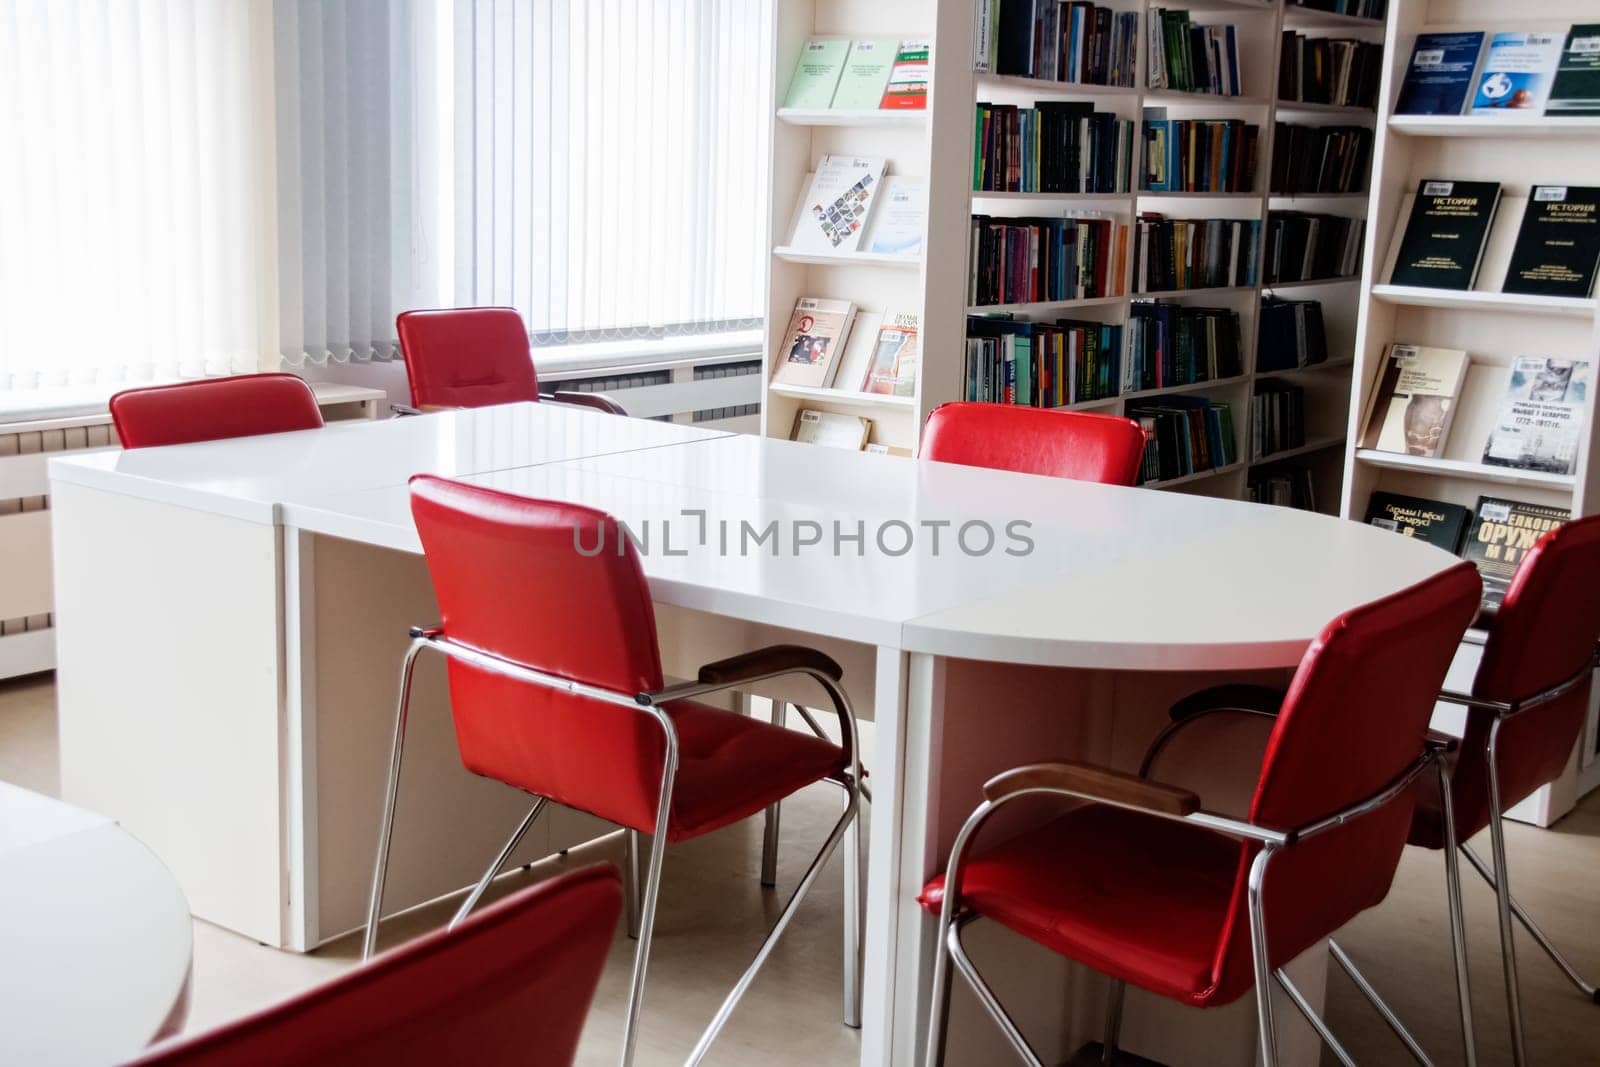 Belarus, Minsk - 18 september, 2019: A table in the library close up